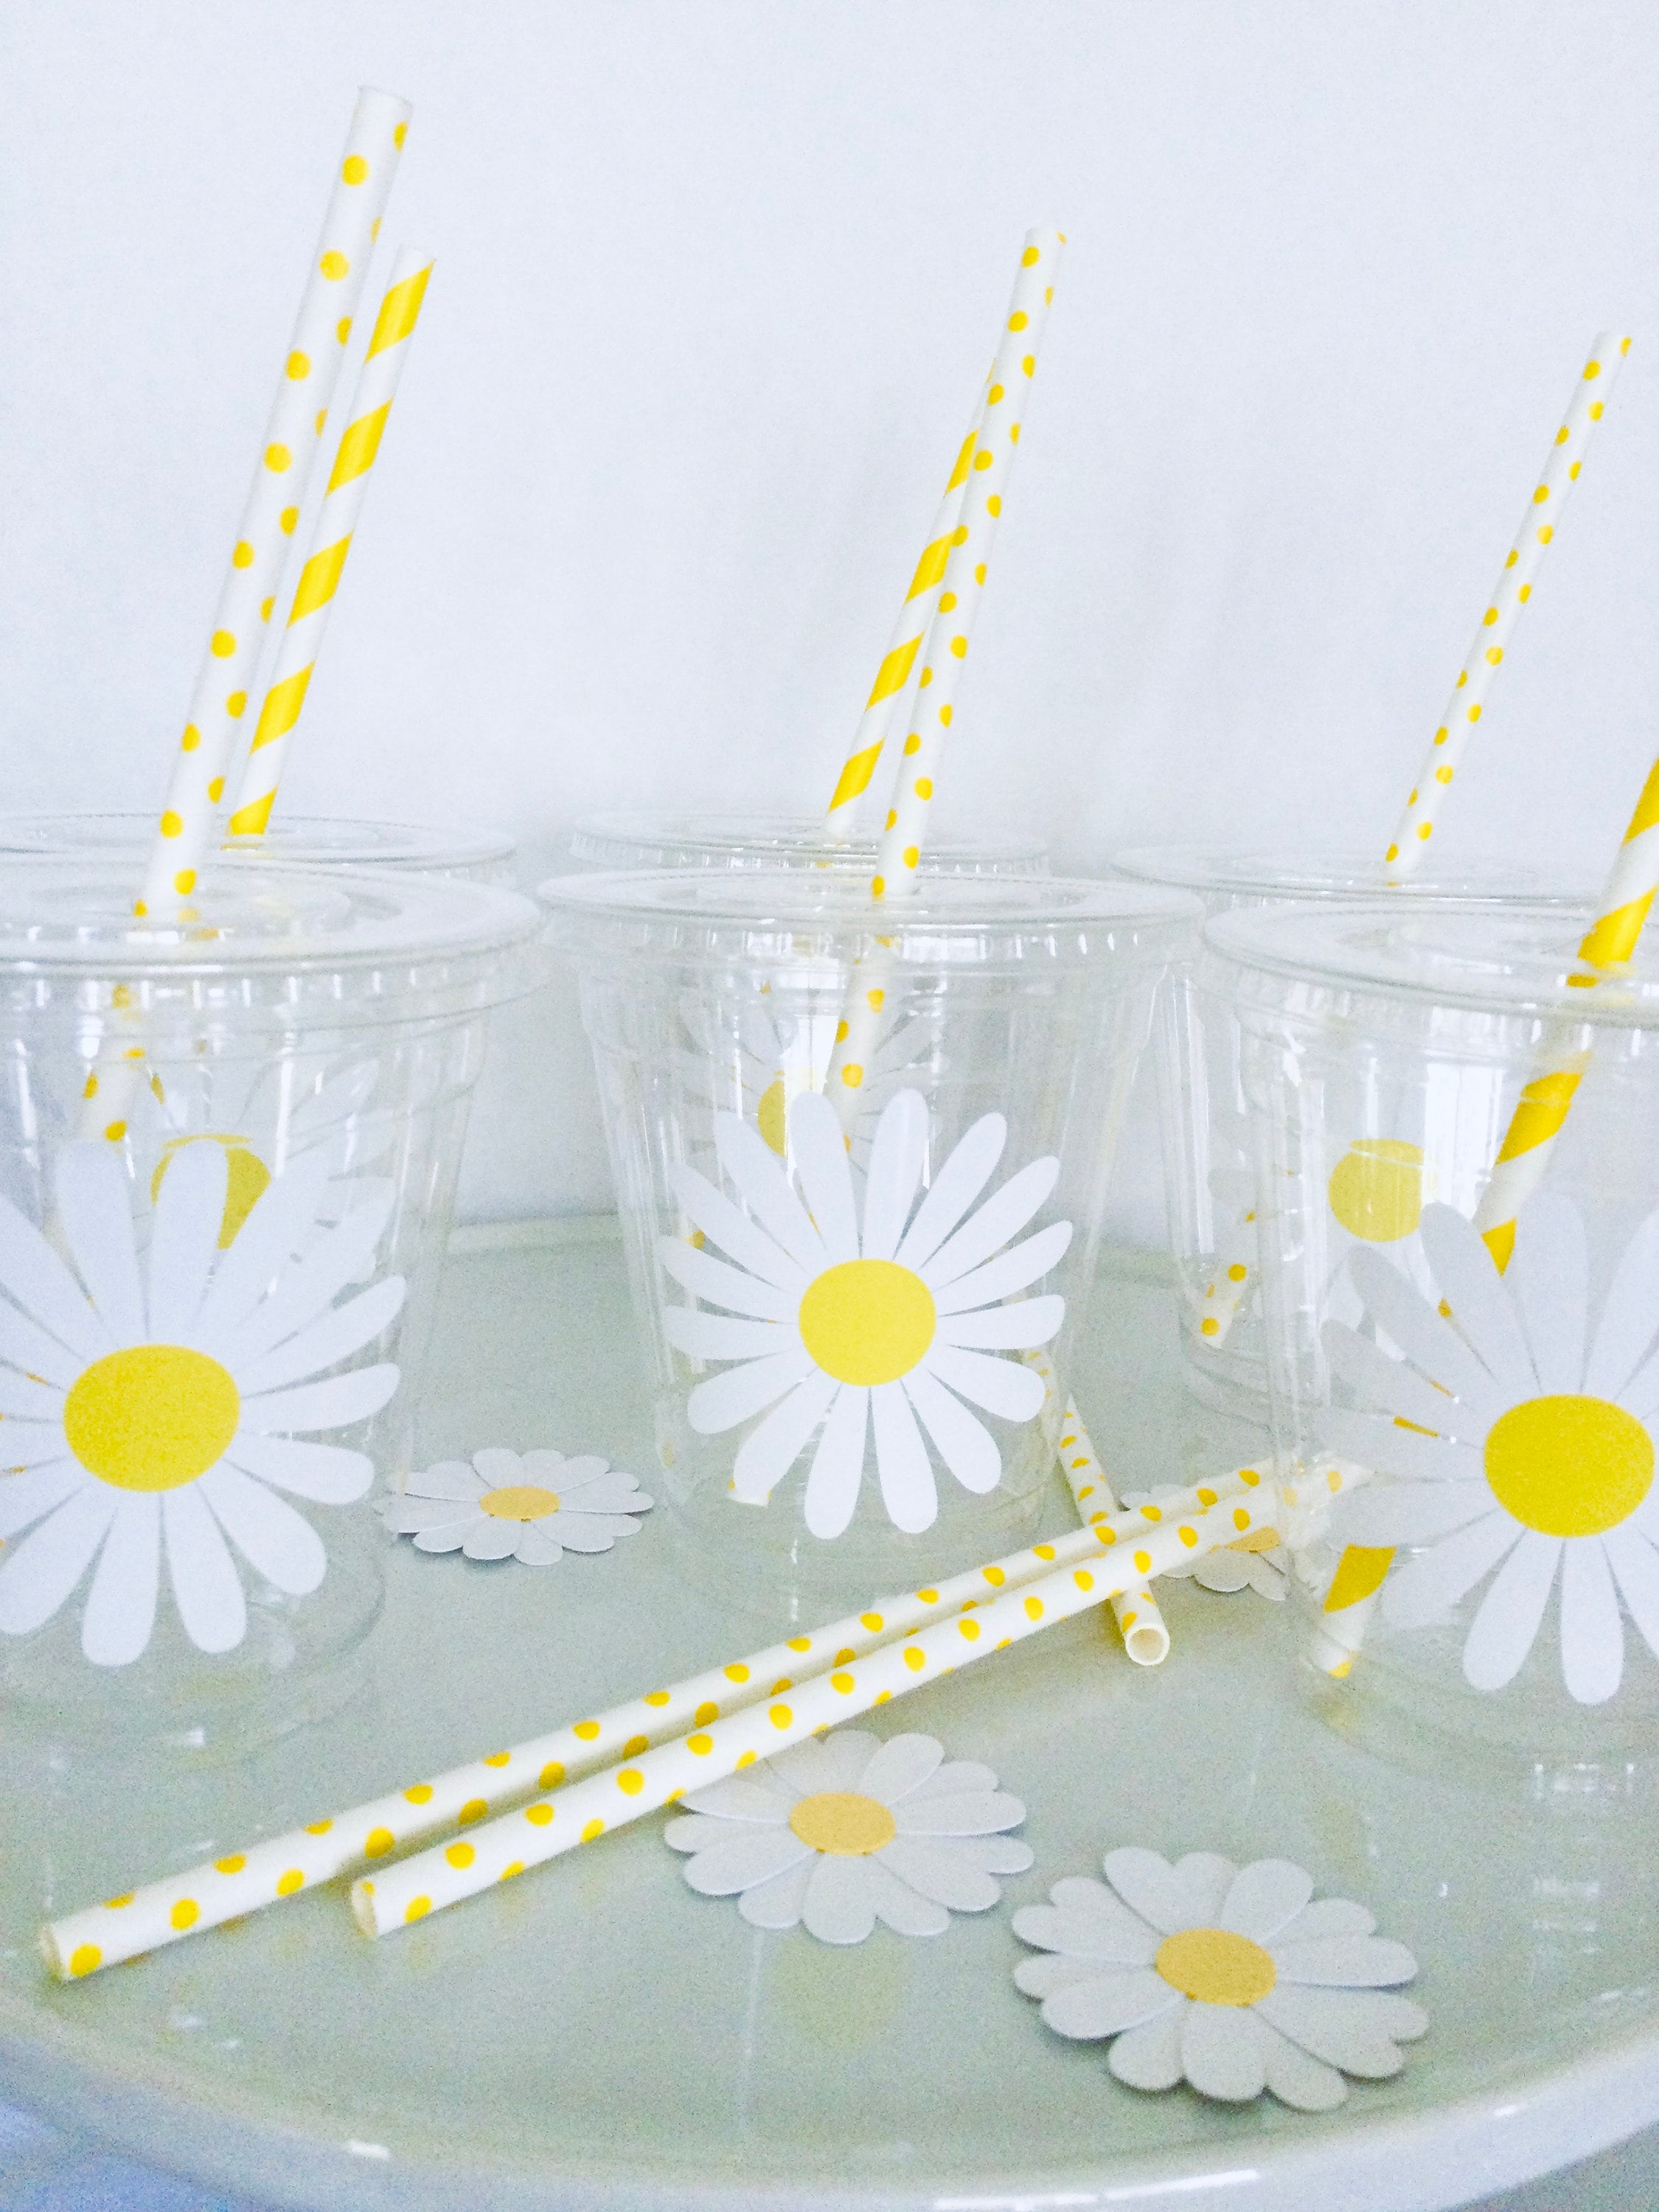 Daisy Plastic Disposable Drink Cups Favor Cup Daisy Baby Shower